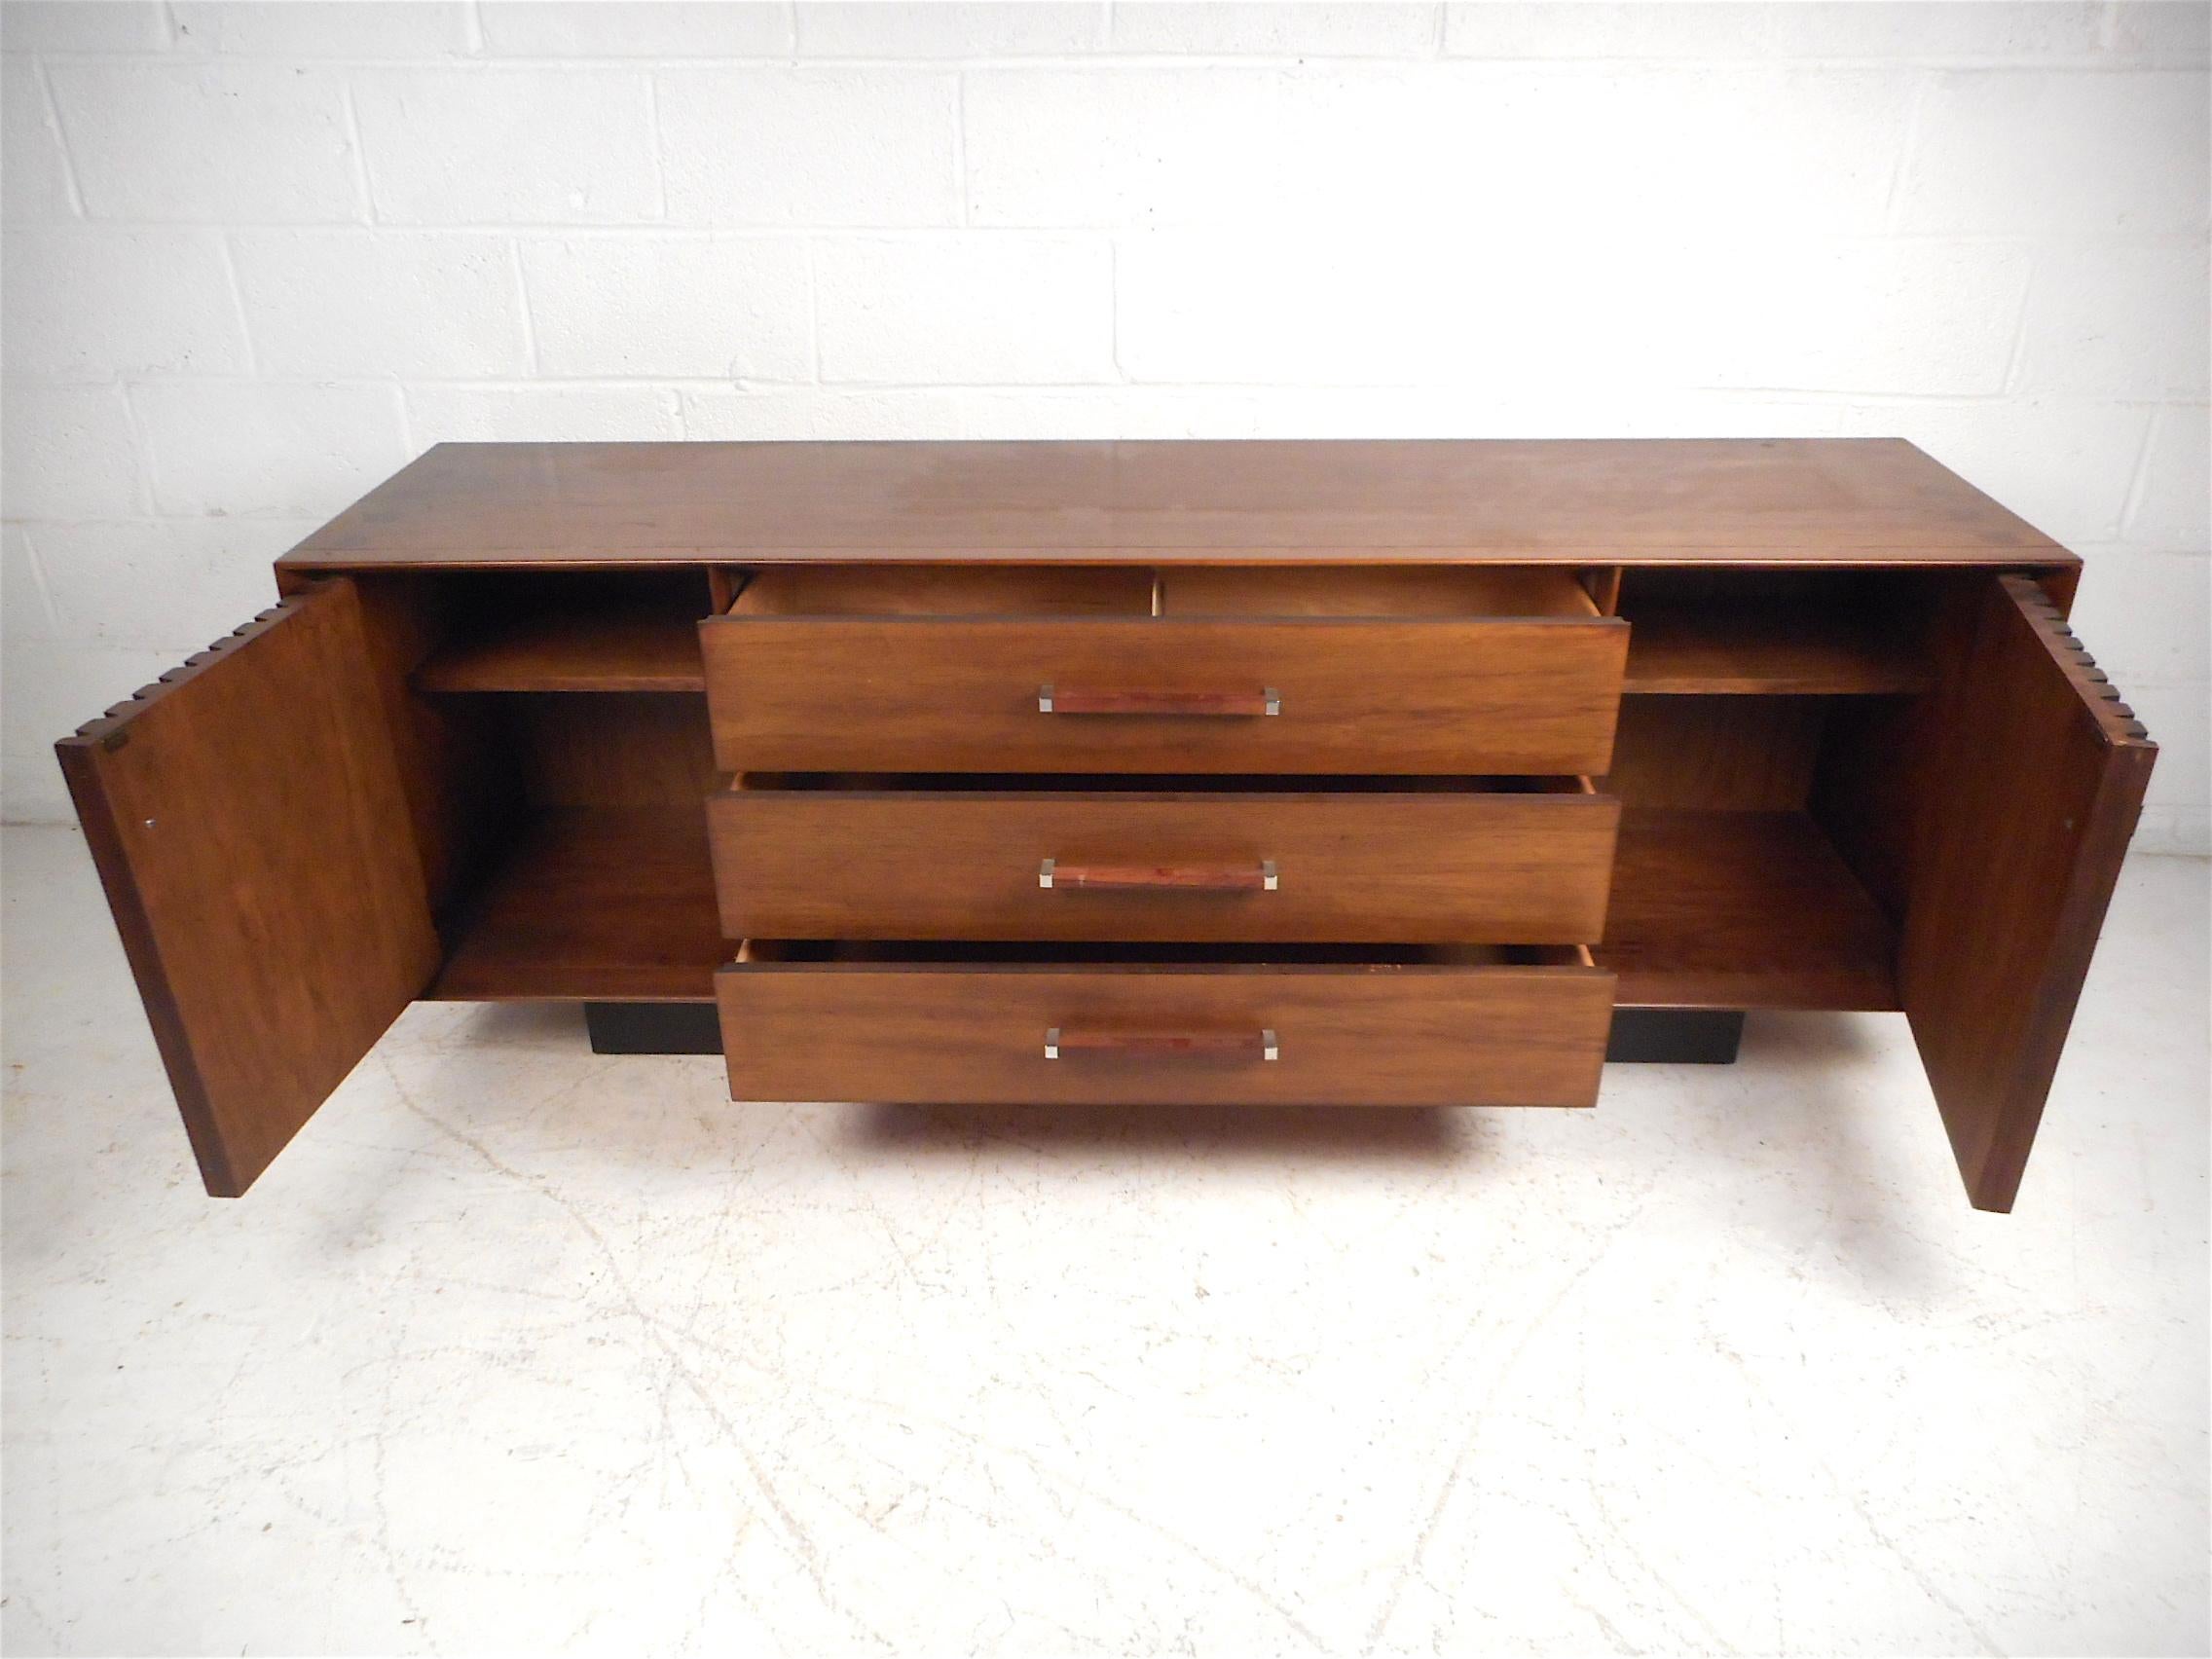 American Midcentury Dresser and Nightstands by Lane Furniture Co.